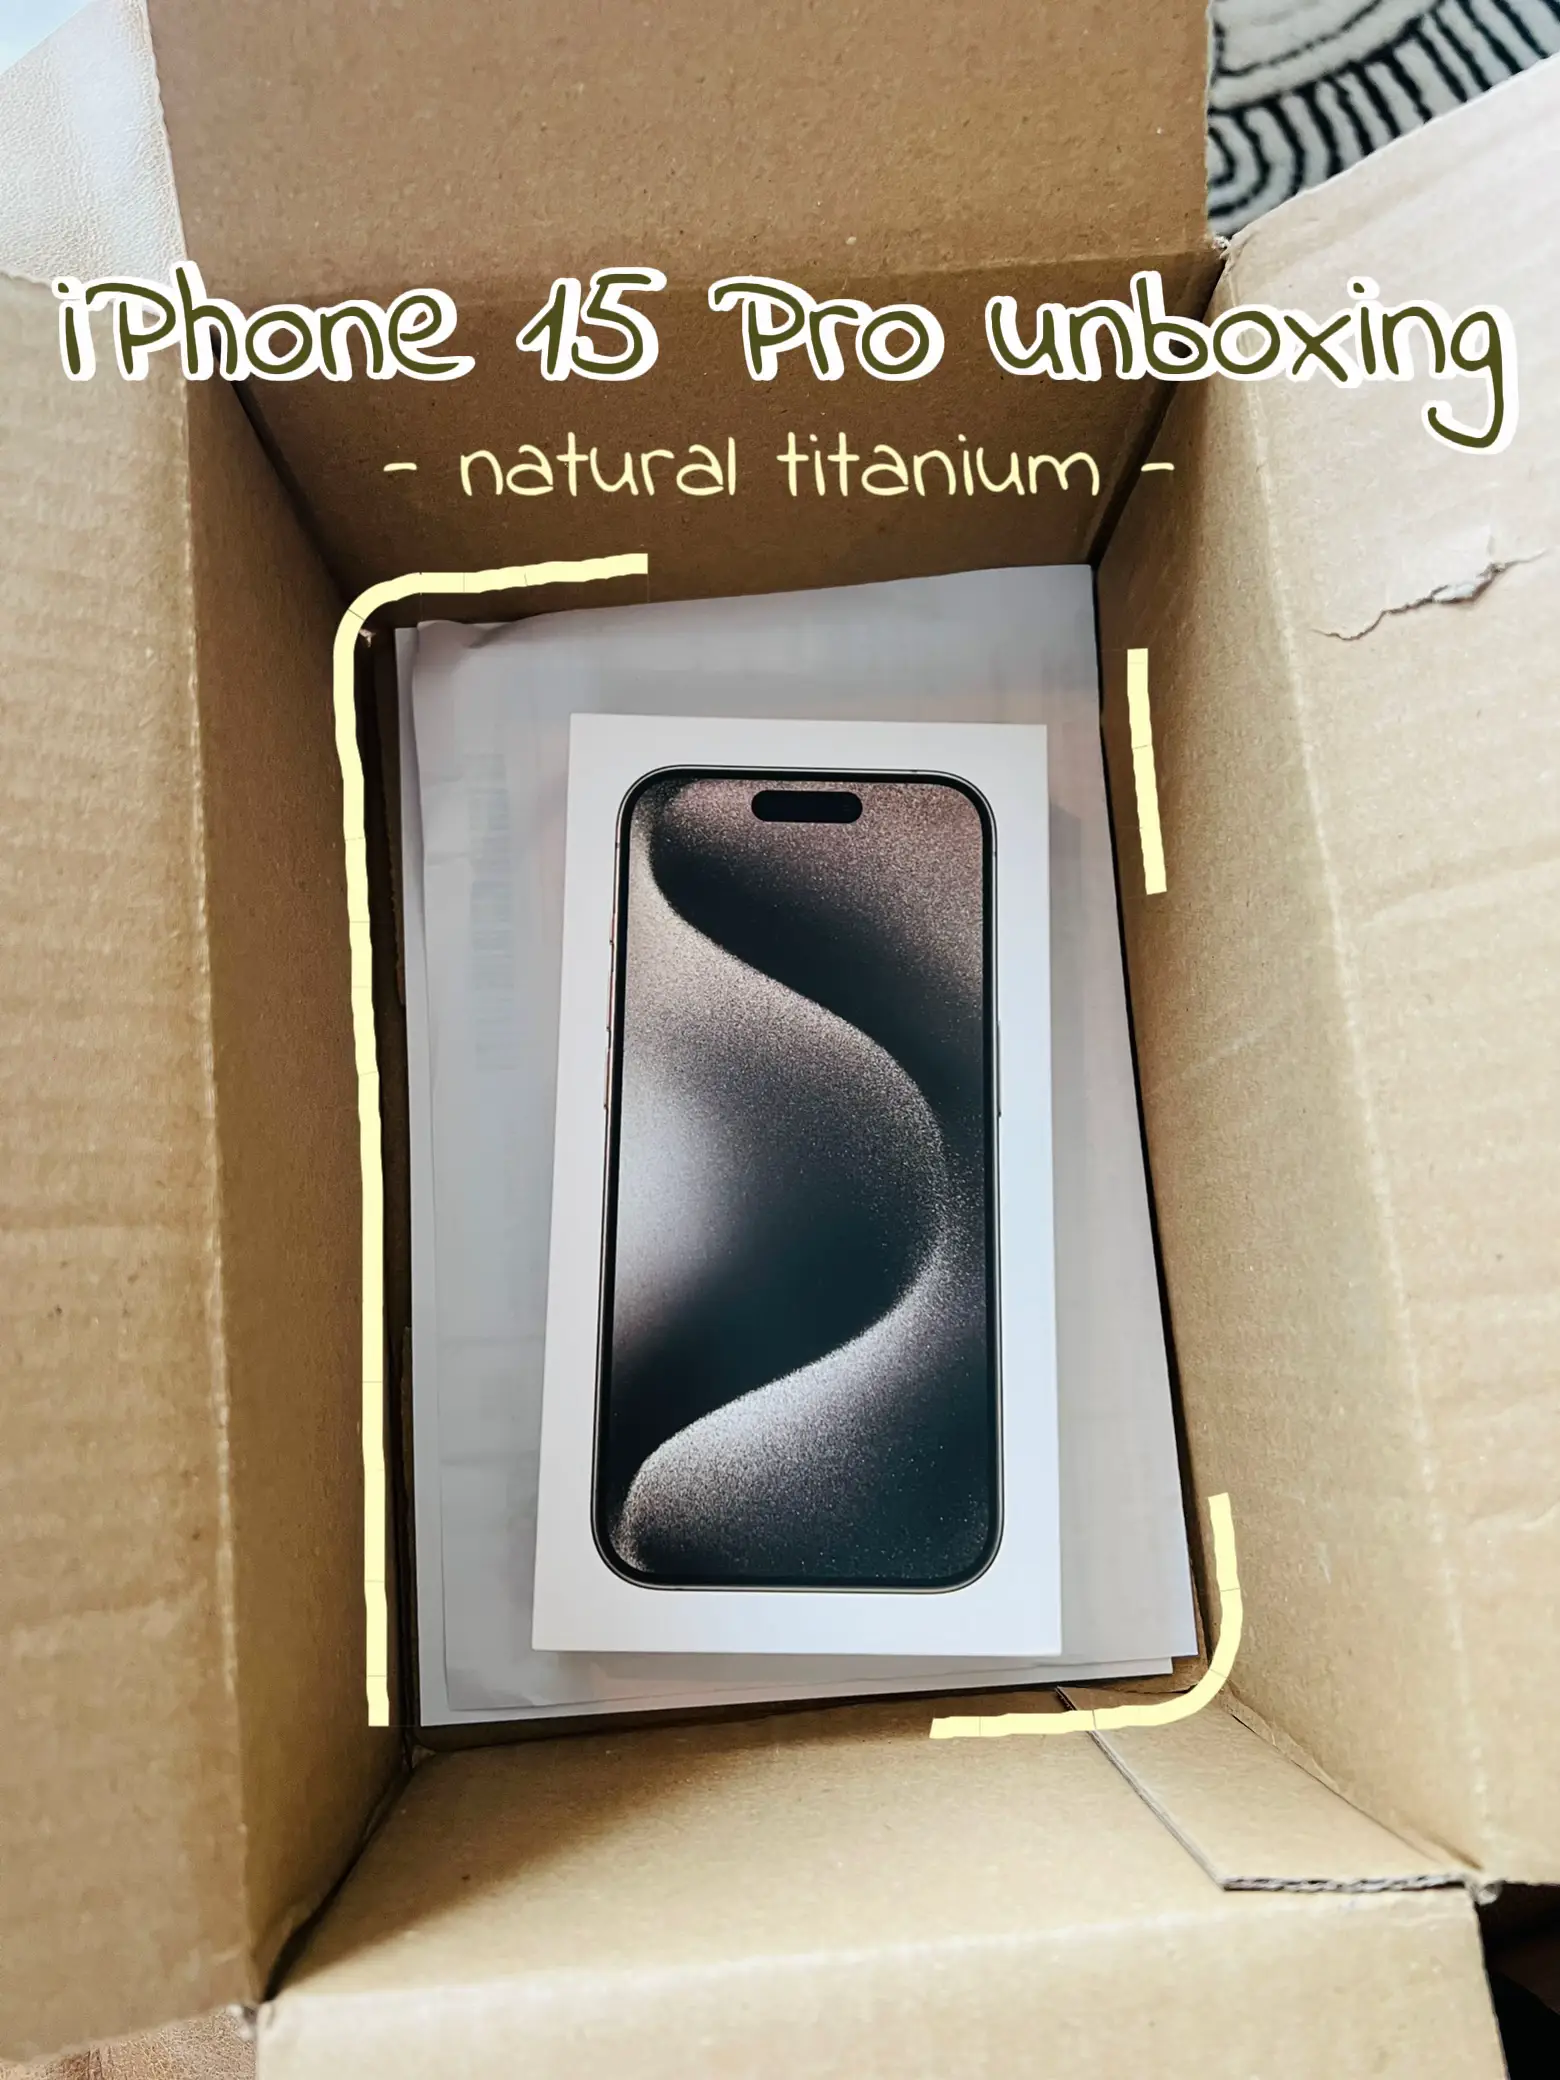 3 things you should do immediately after unboxing your iPhone 15